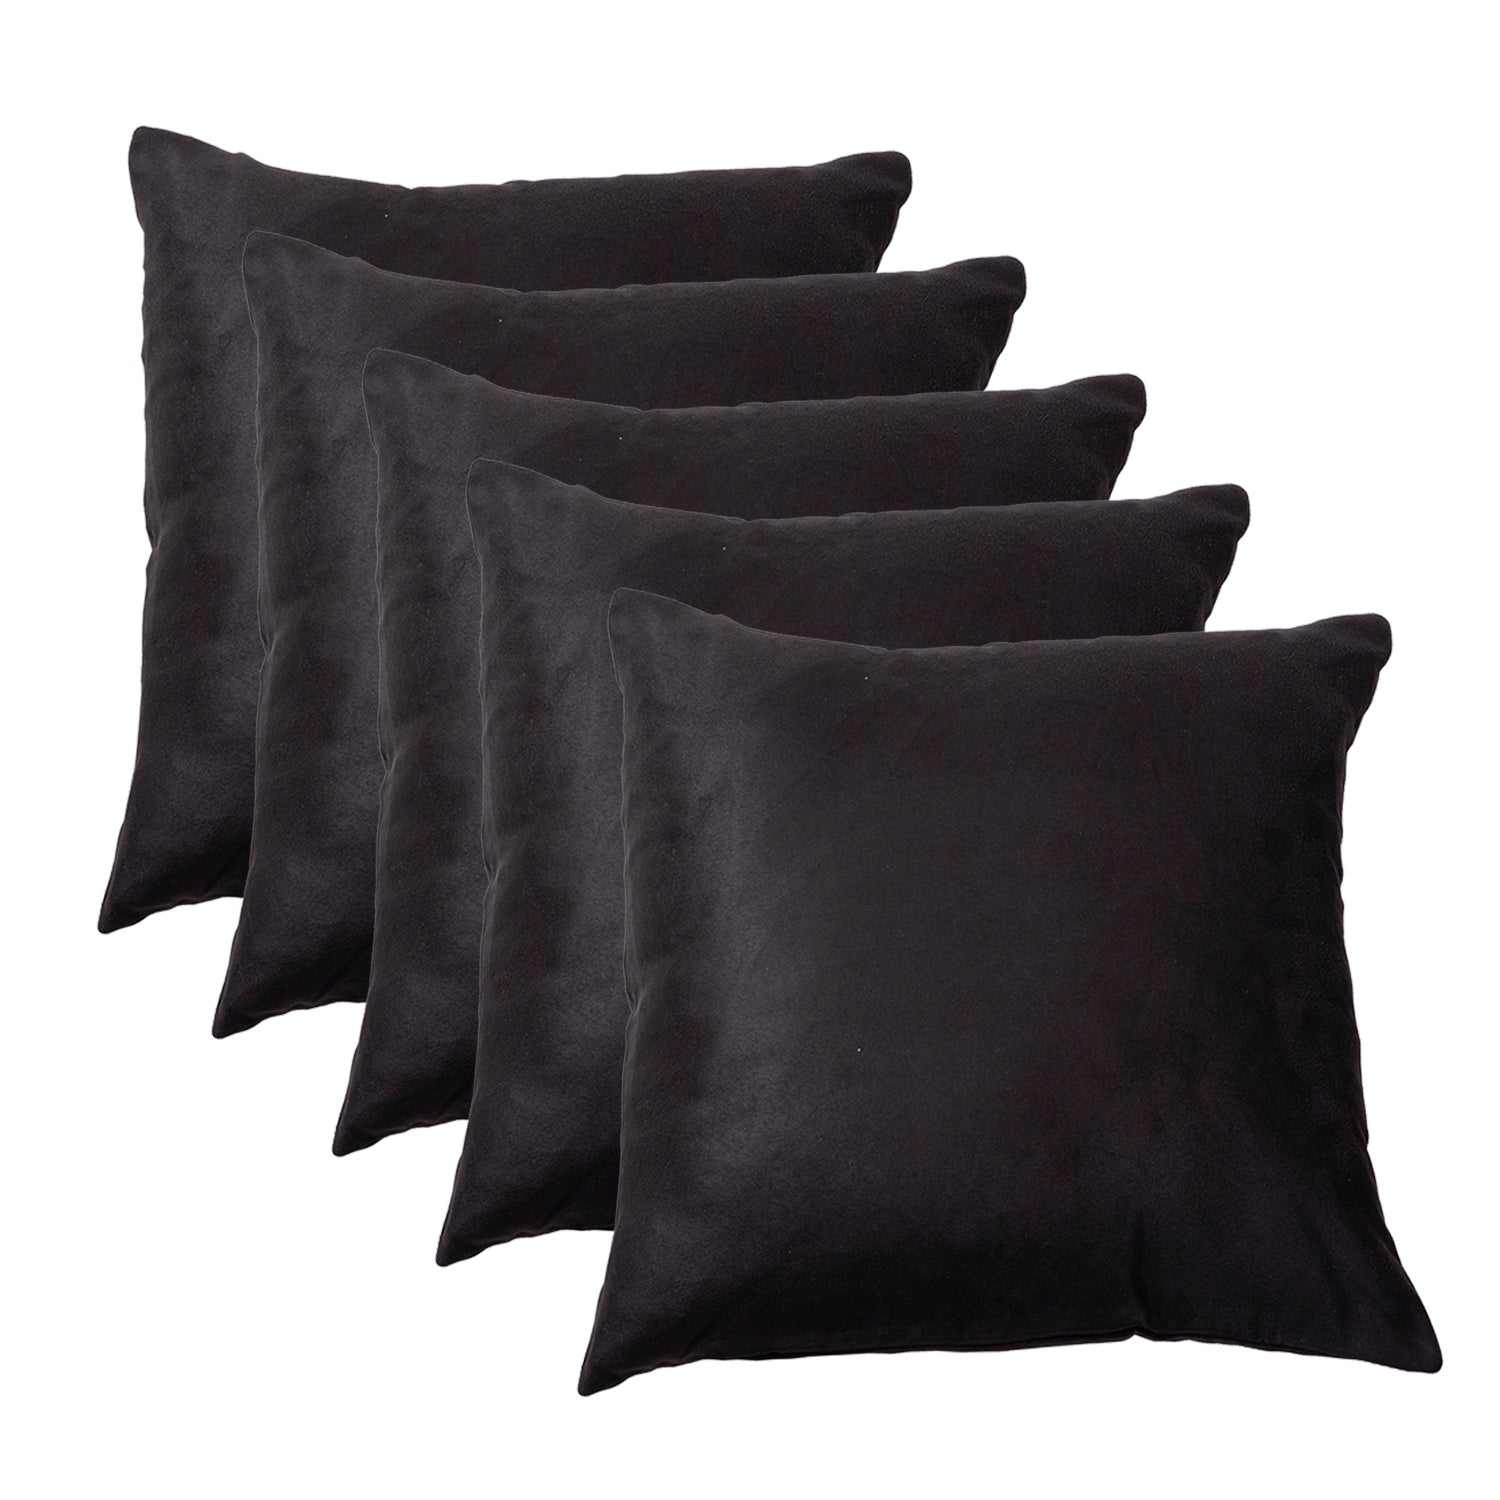 cushion covers set of 5, 16 X 16 inch